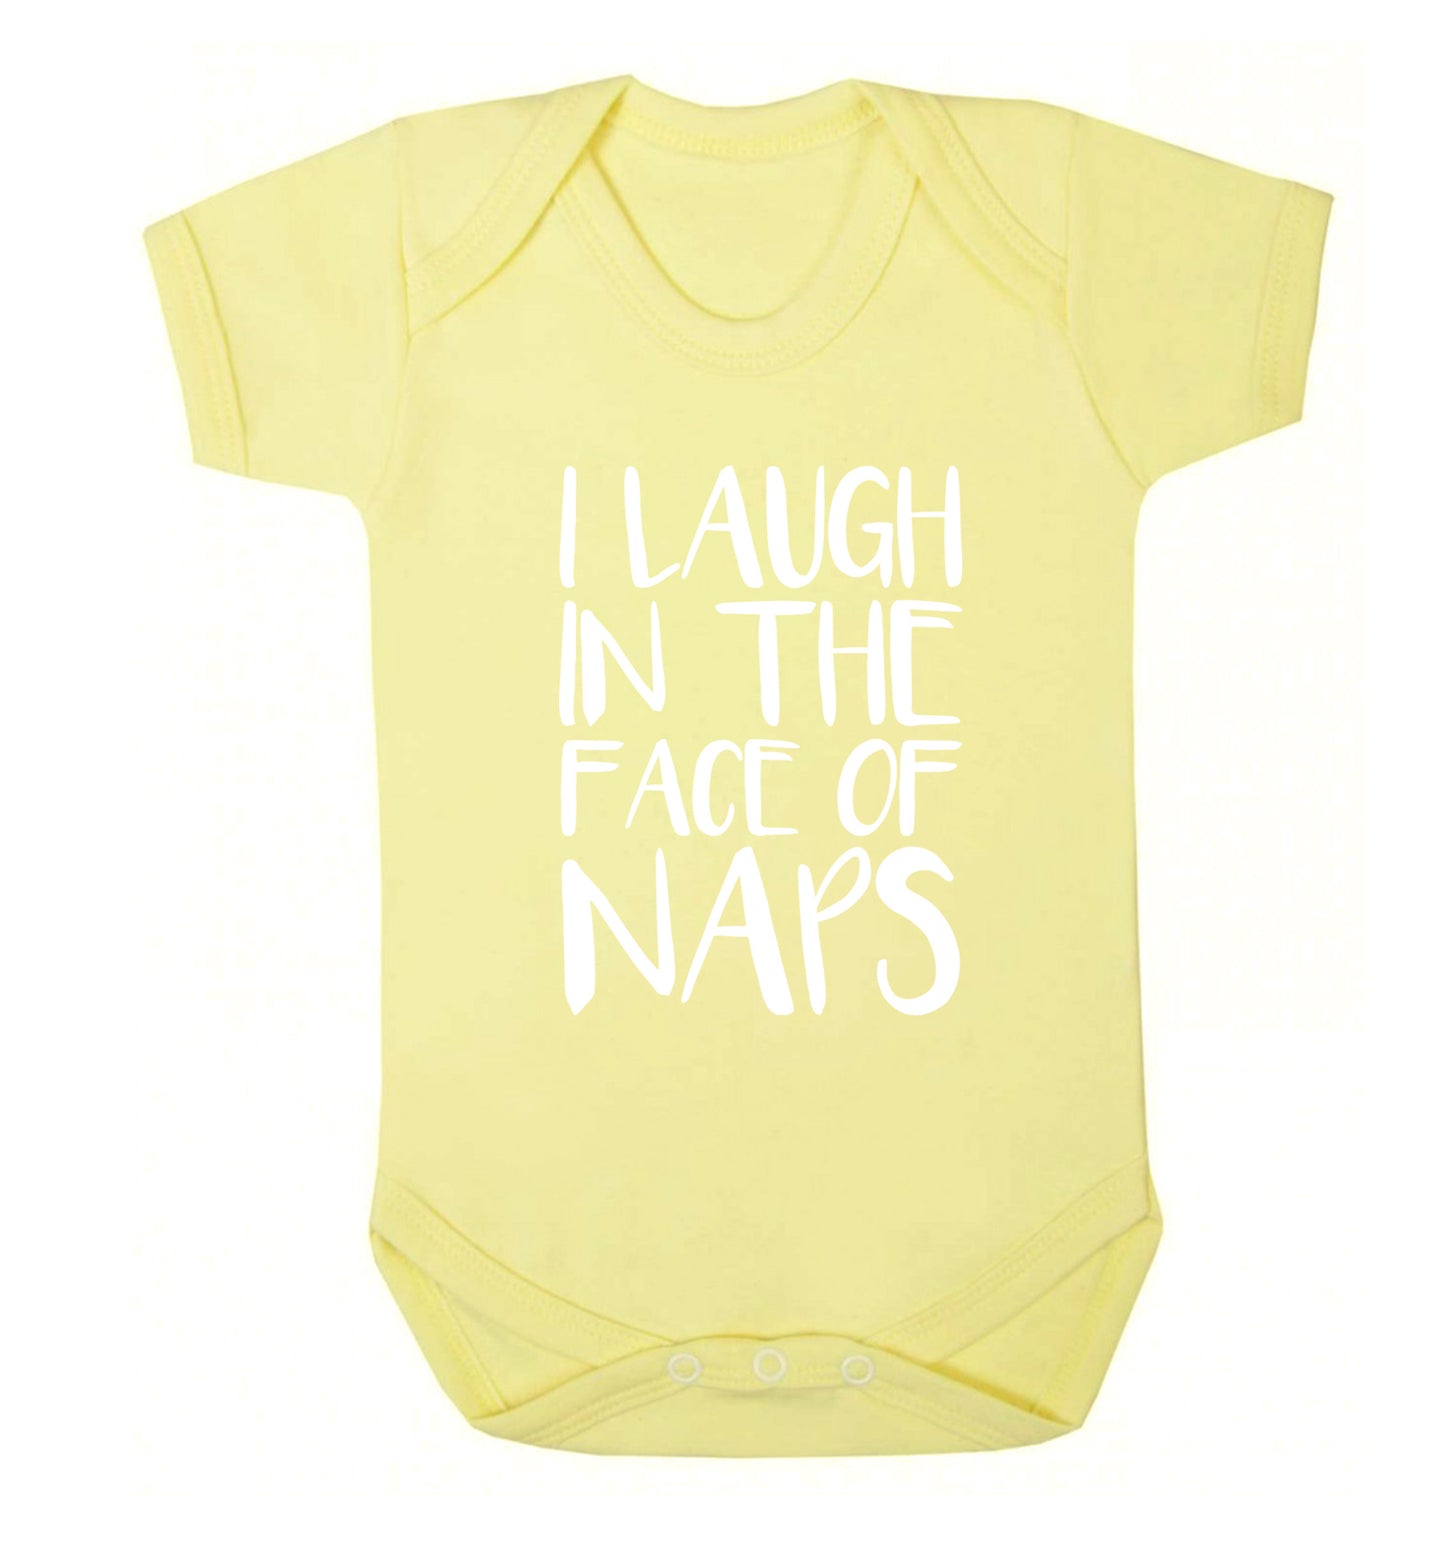 I laugh in the face of naps Baby Vest pale yellow 18-24 months